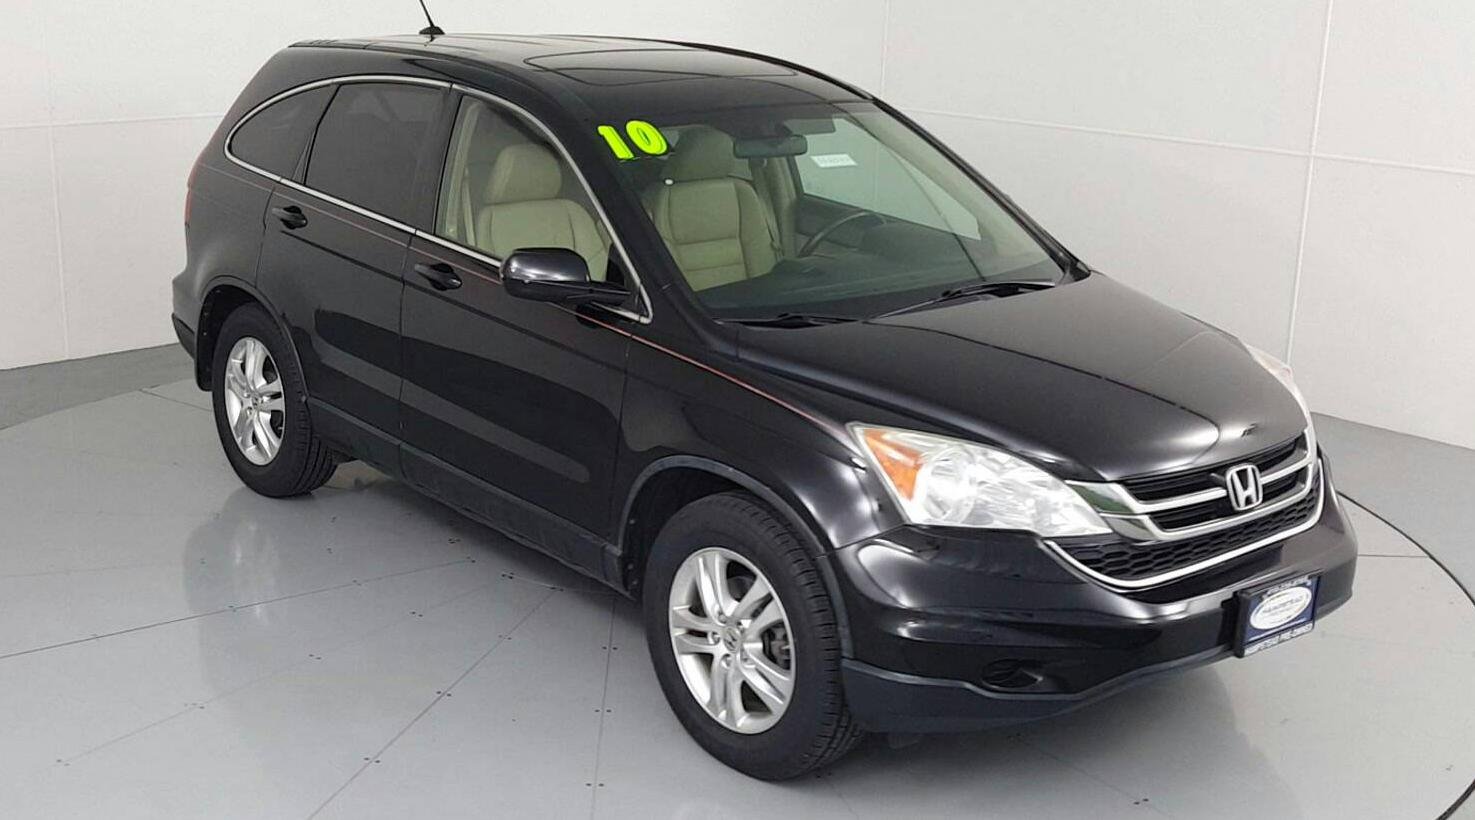 Pre-Owned 2010 Honda CR-V EX-L 4WD Sport Utility Vehicles in Hampstead